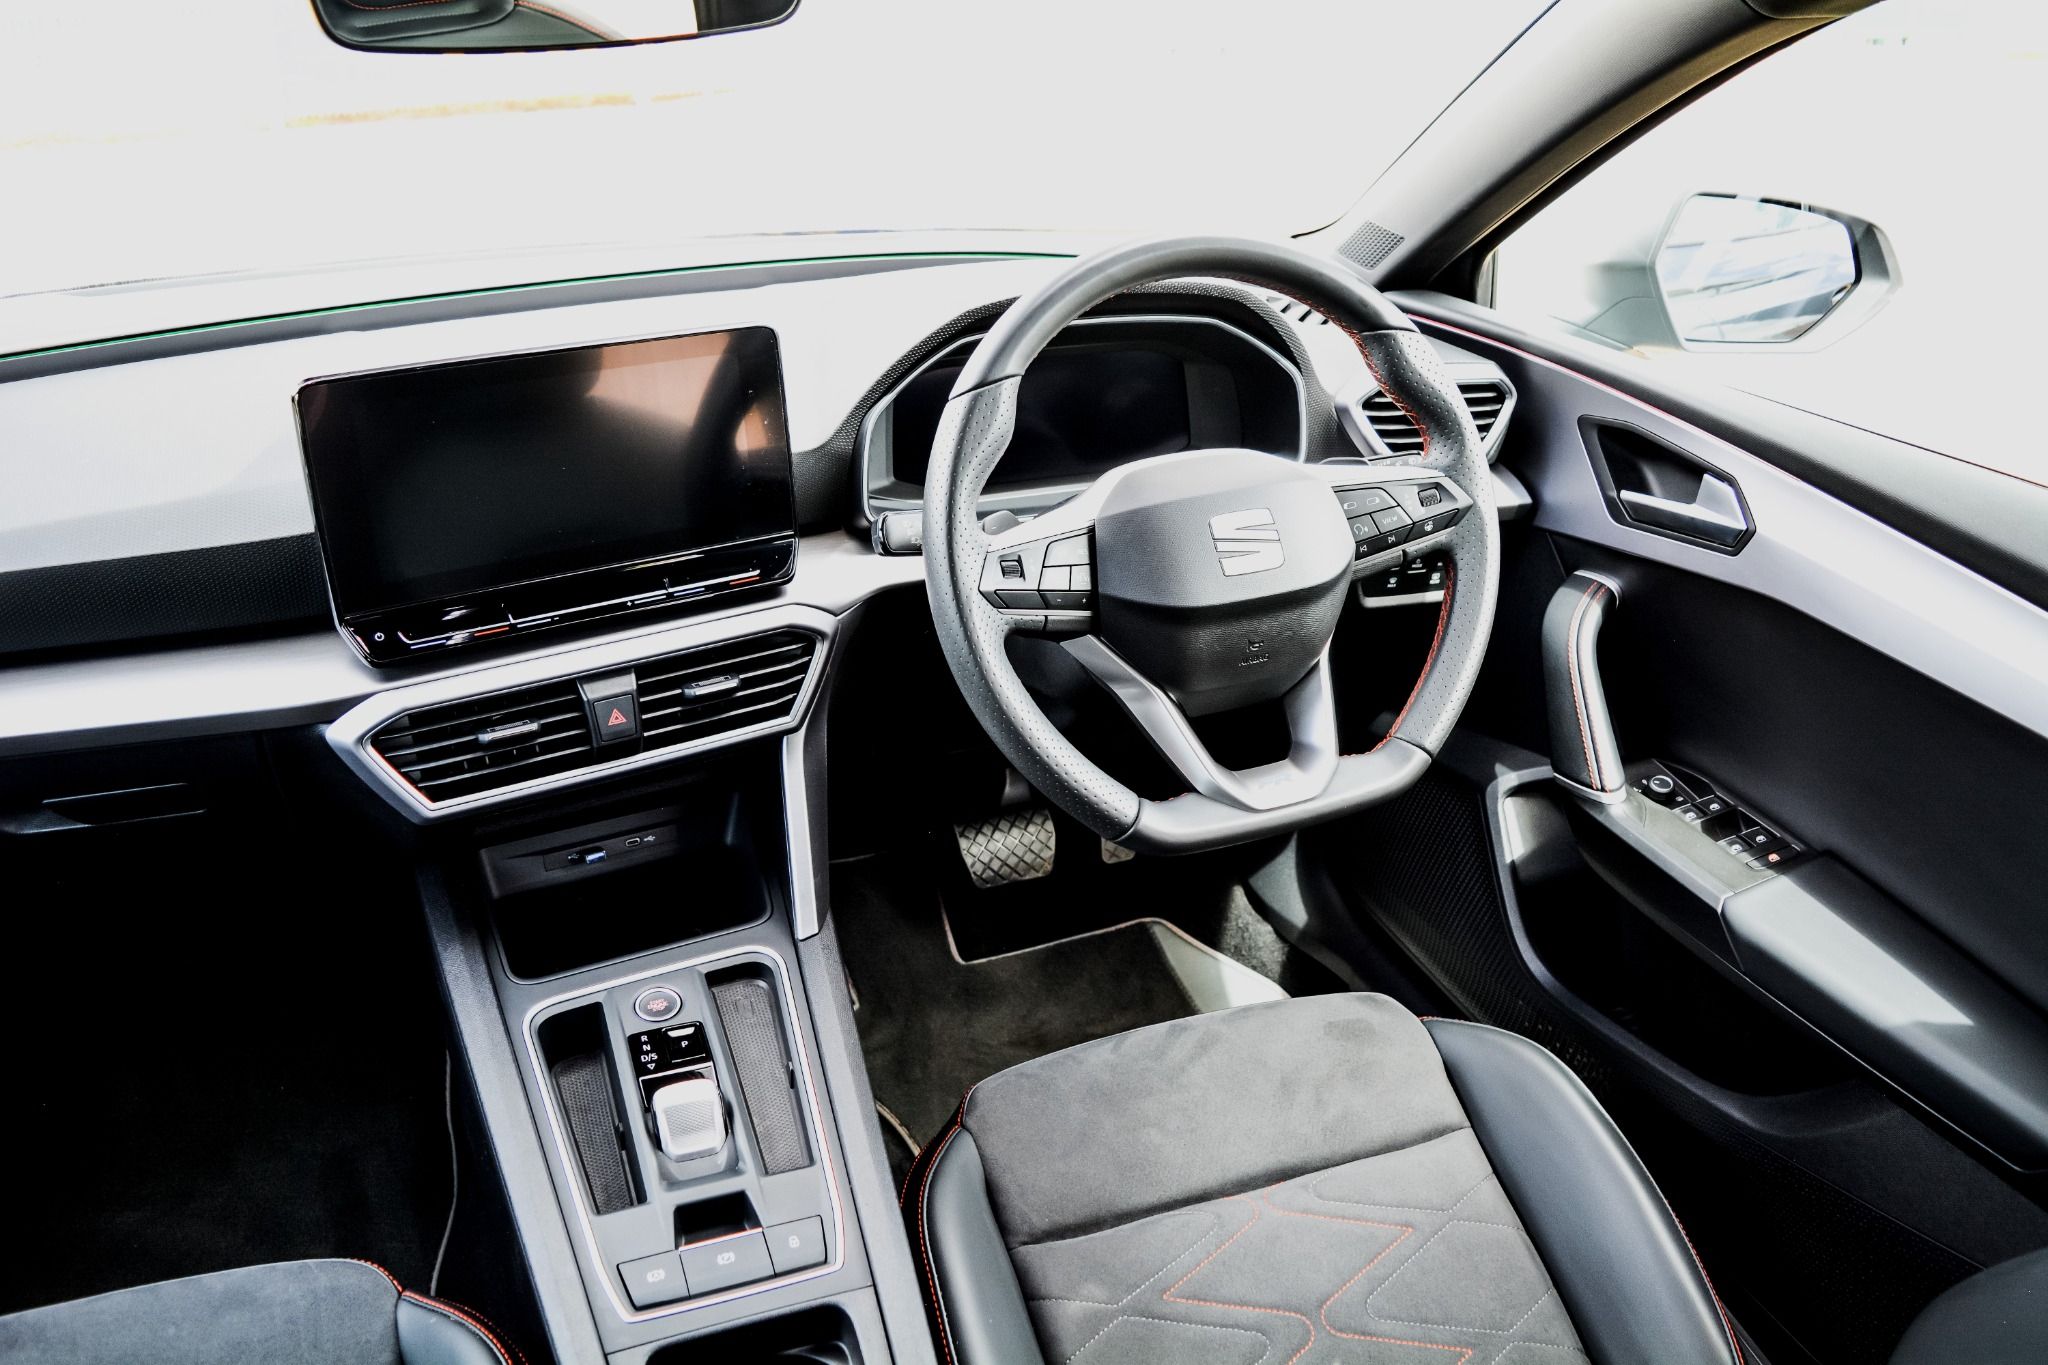 Interior view of Seat Leon showing leather black flat bottom steering wheels and entertainment system